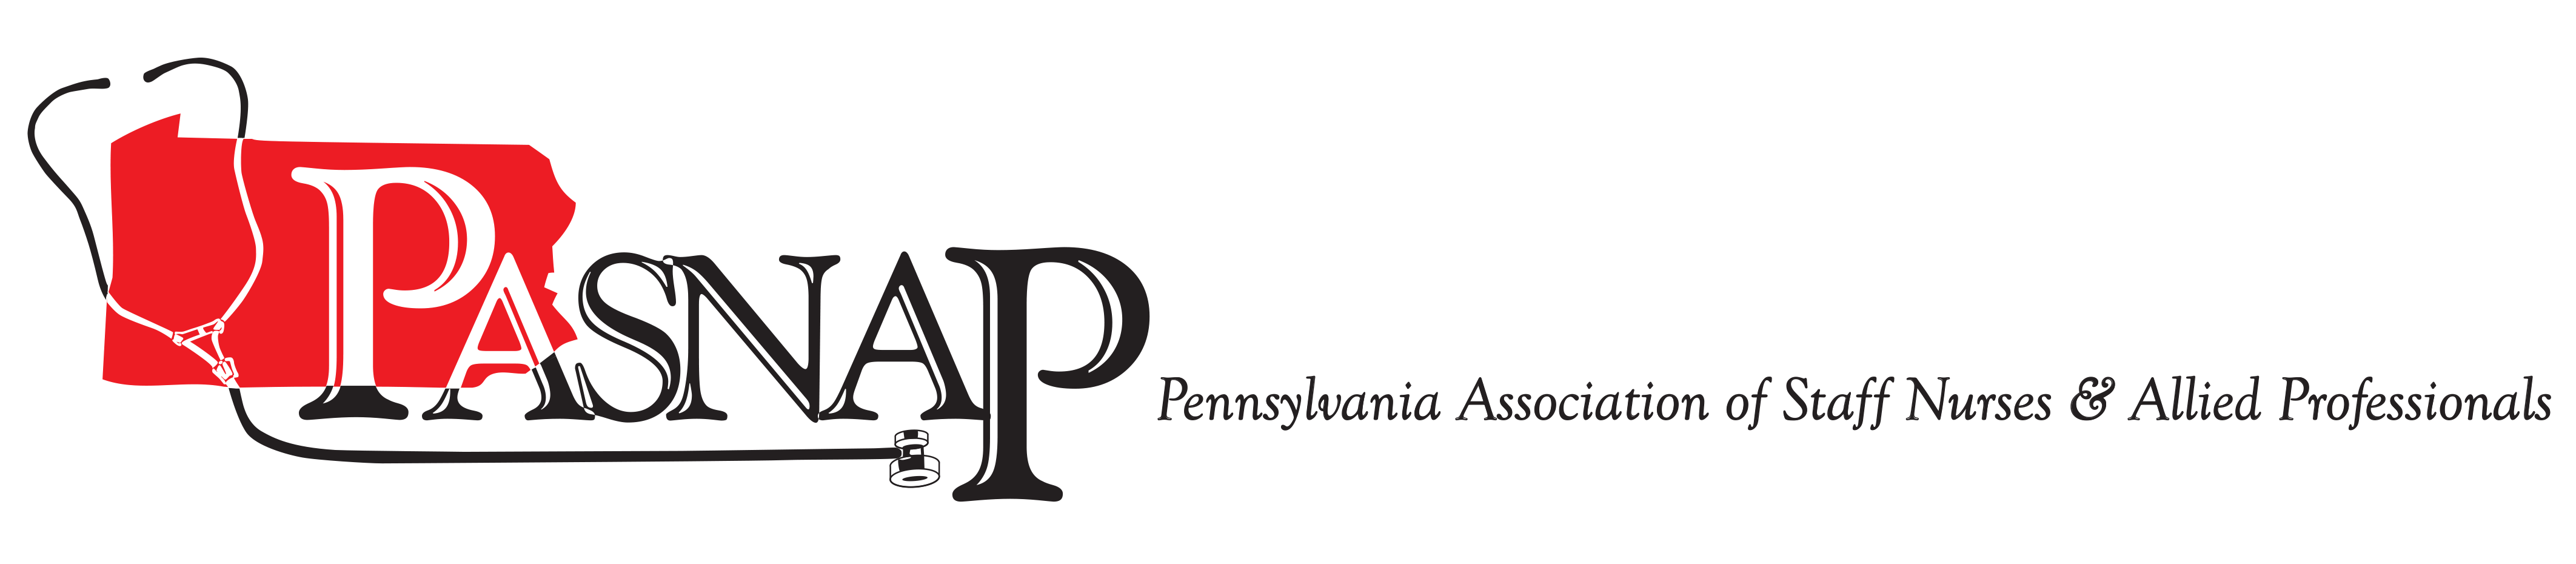 PASNAP – Pennsylvania Association of Staff Nurses and Allied Professionals